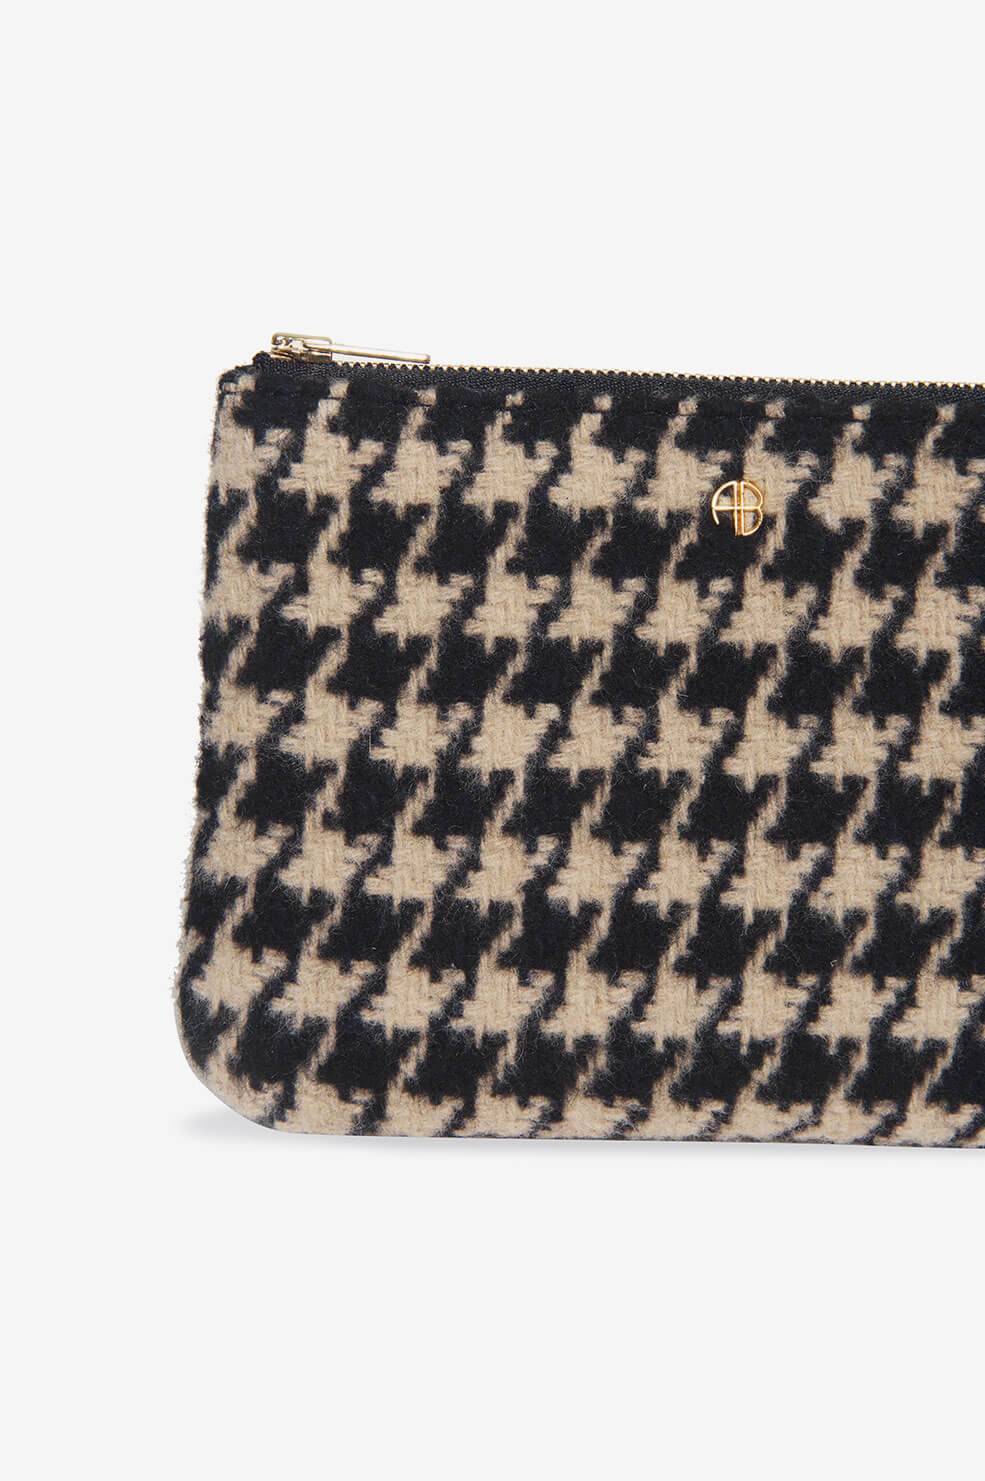 Anine Bing - Skye Coin Purse in Houndstooth